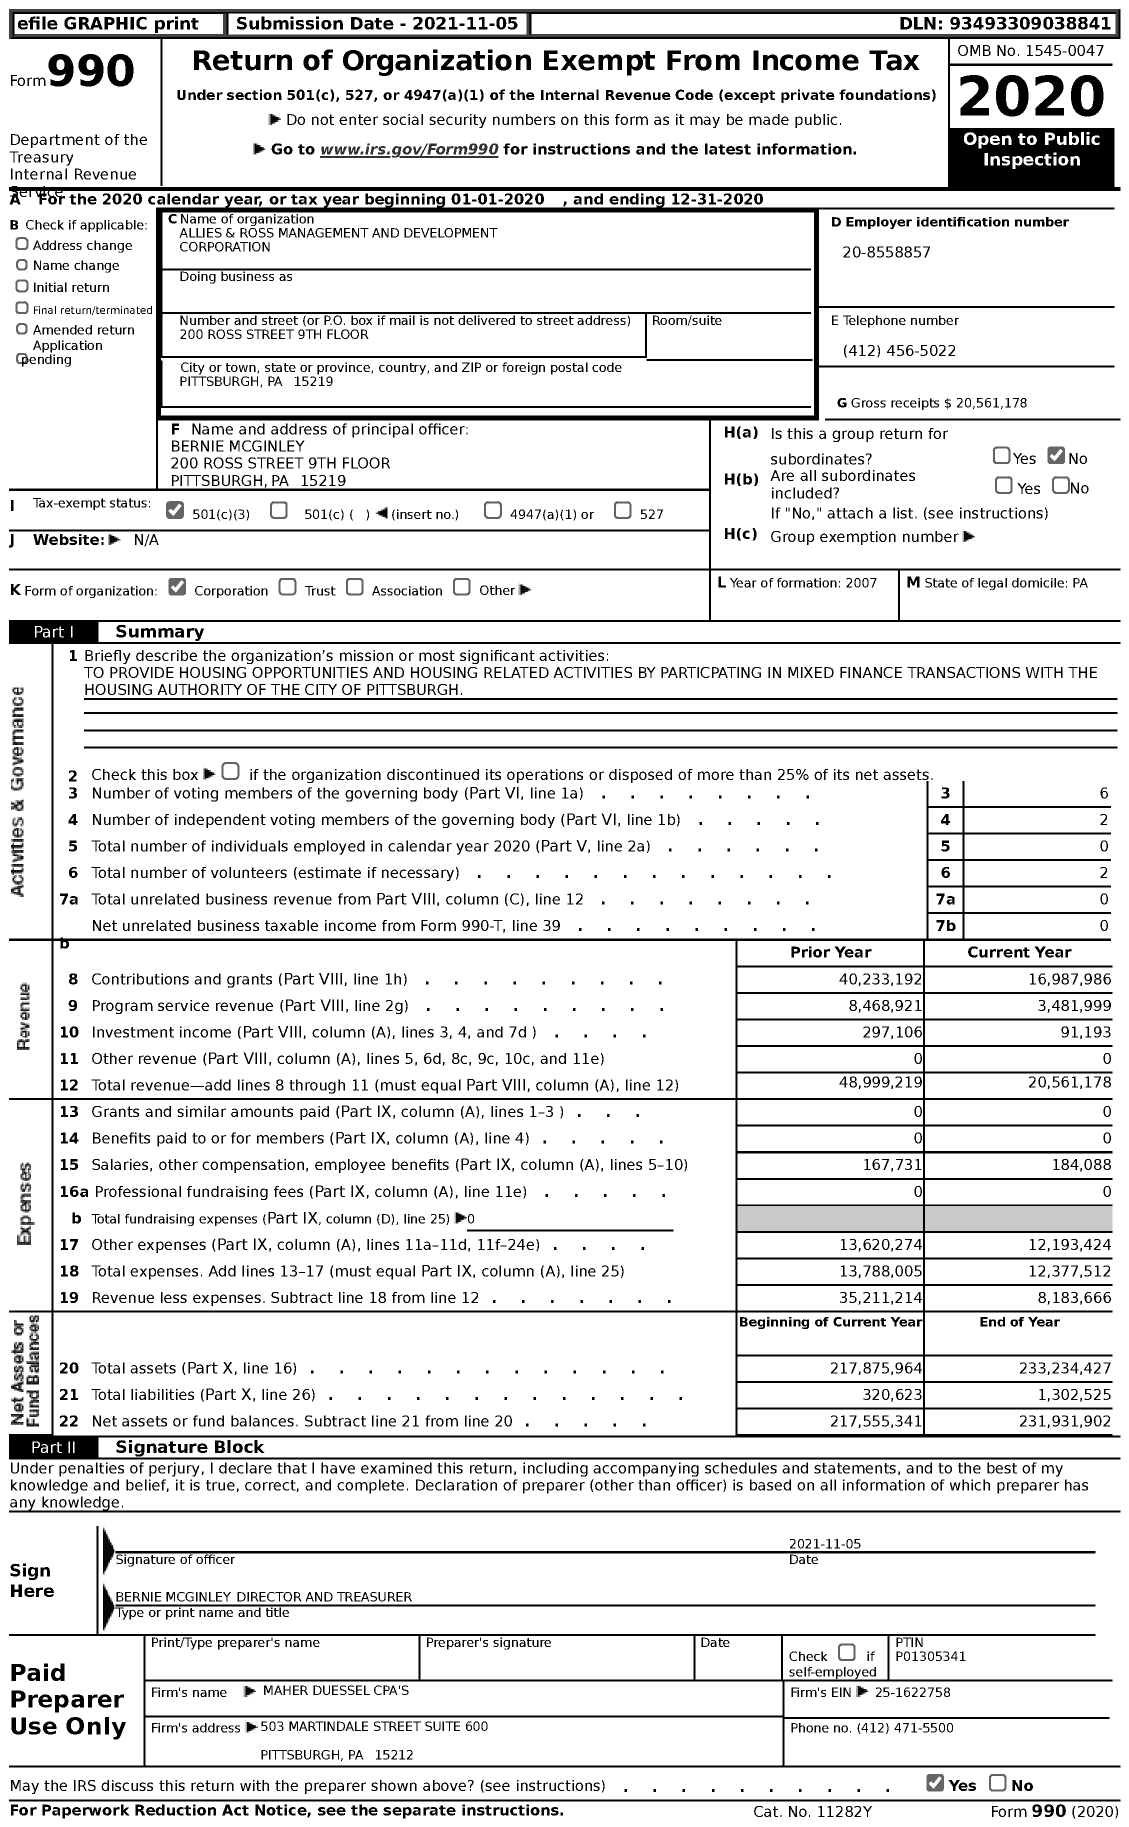 Image of first page of 2020 Form 990 for Allies and Ross Management and Development Corporation